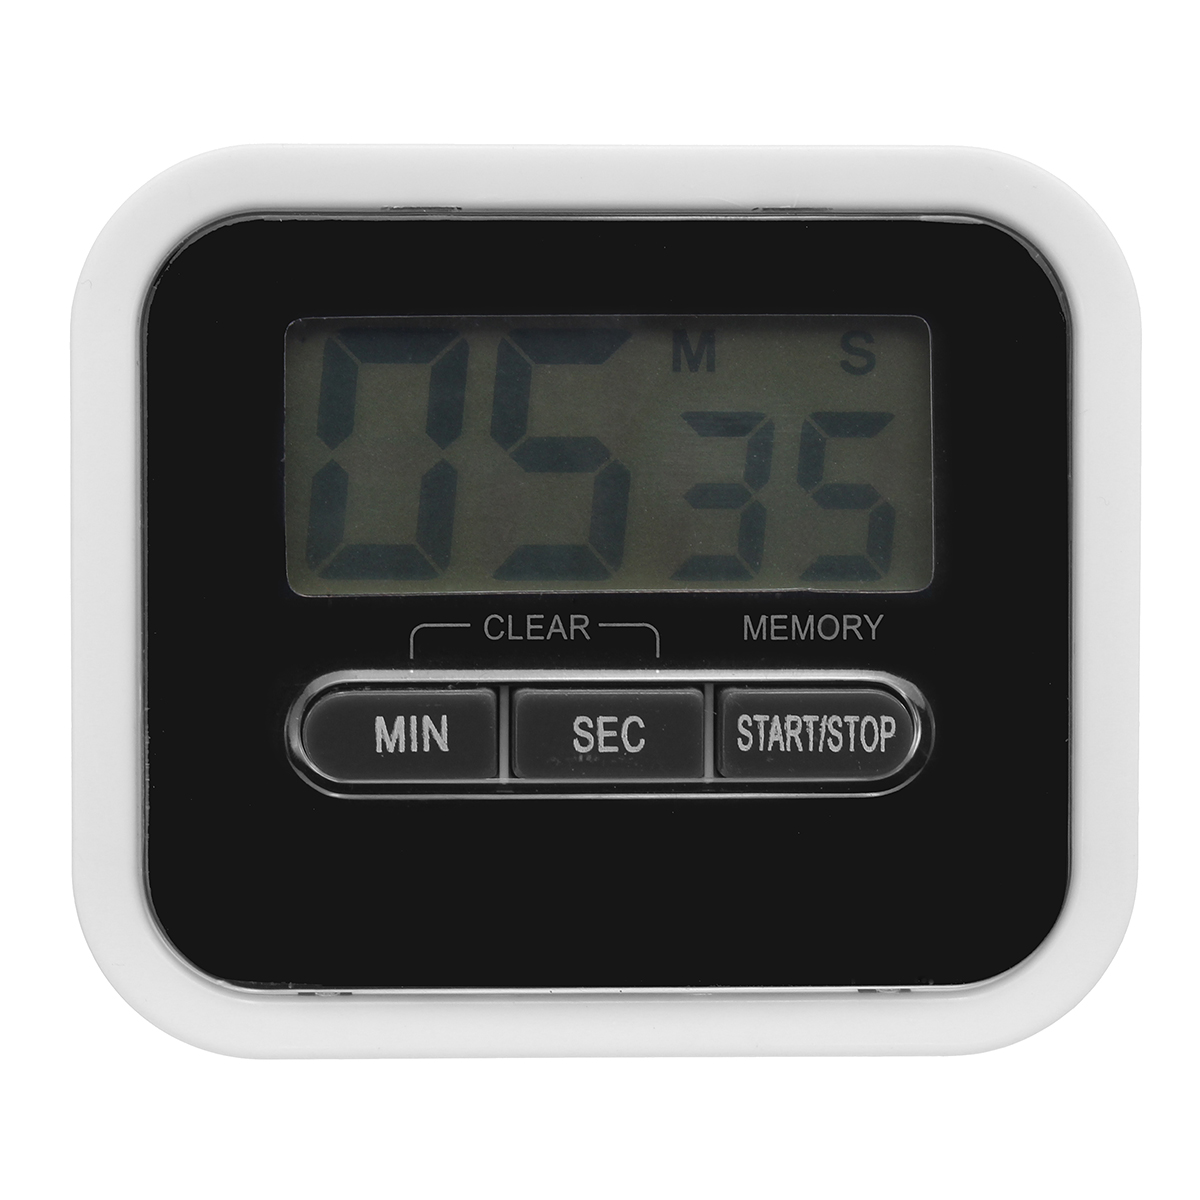 LCD Display Digital Home Cooking Timer Alarm Count UP Down Clock Alarm Countdown Timer ...1200 x 1200